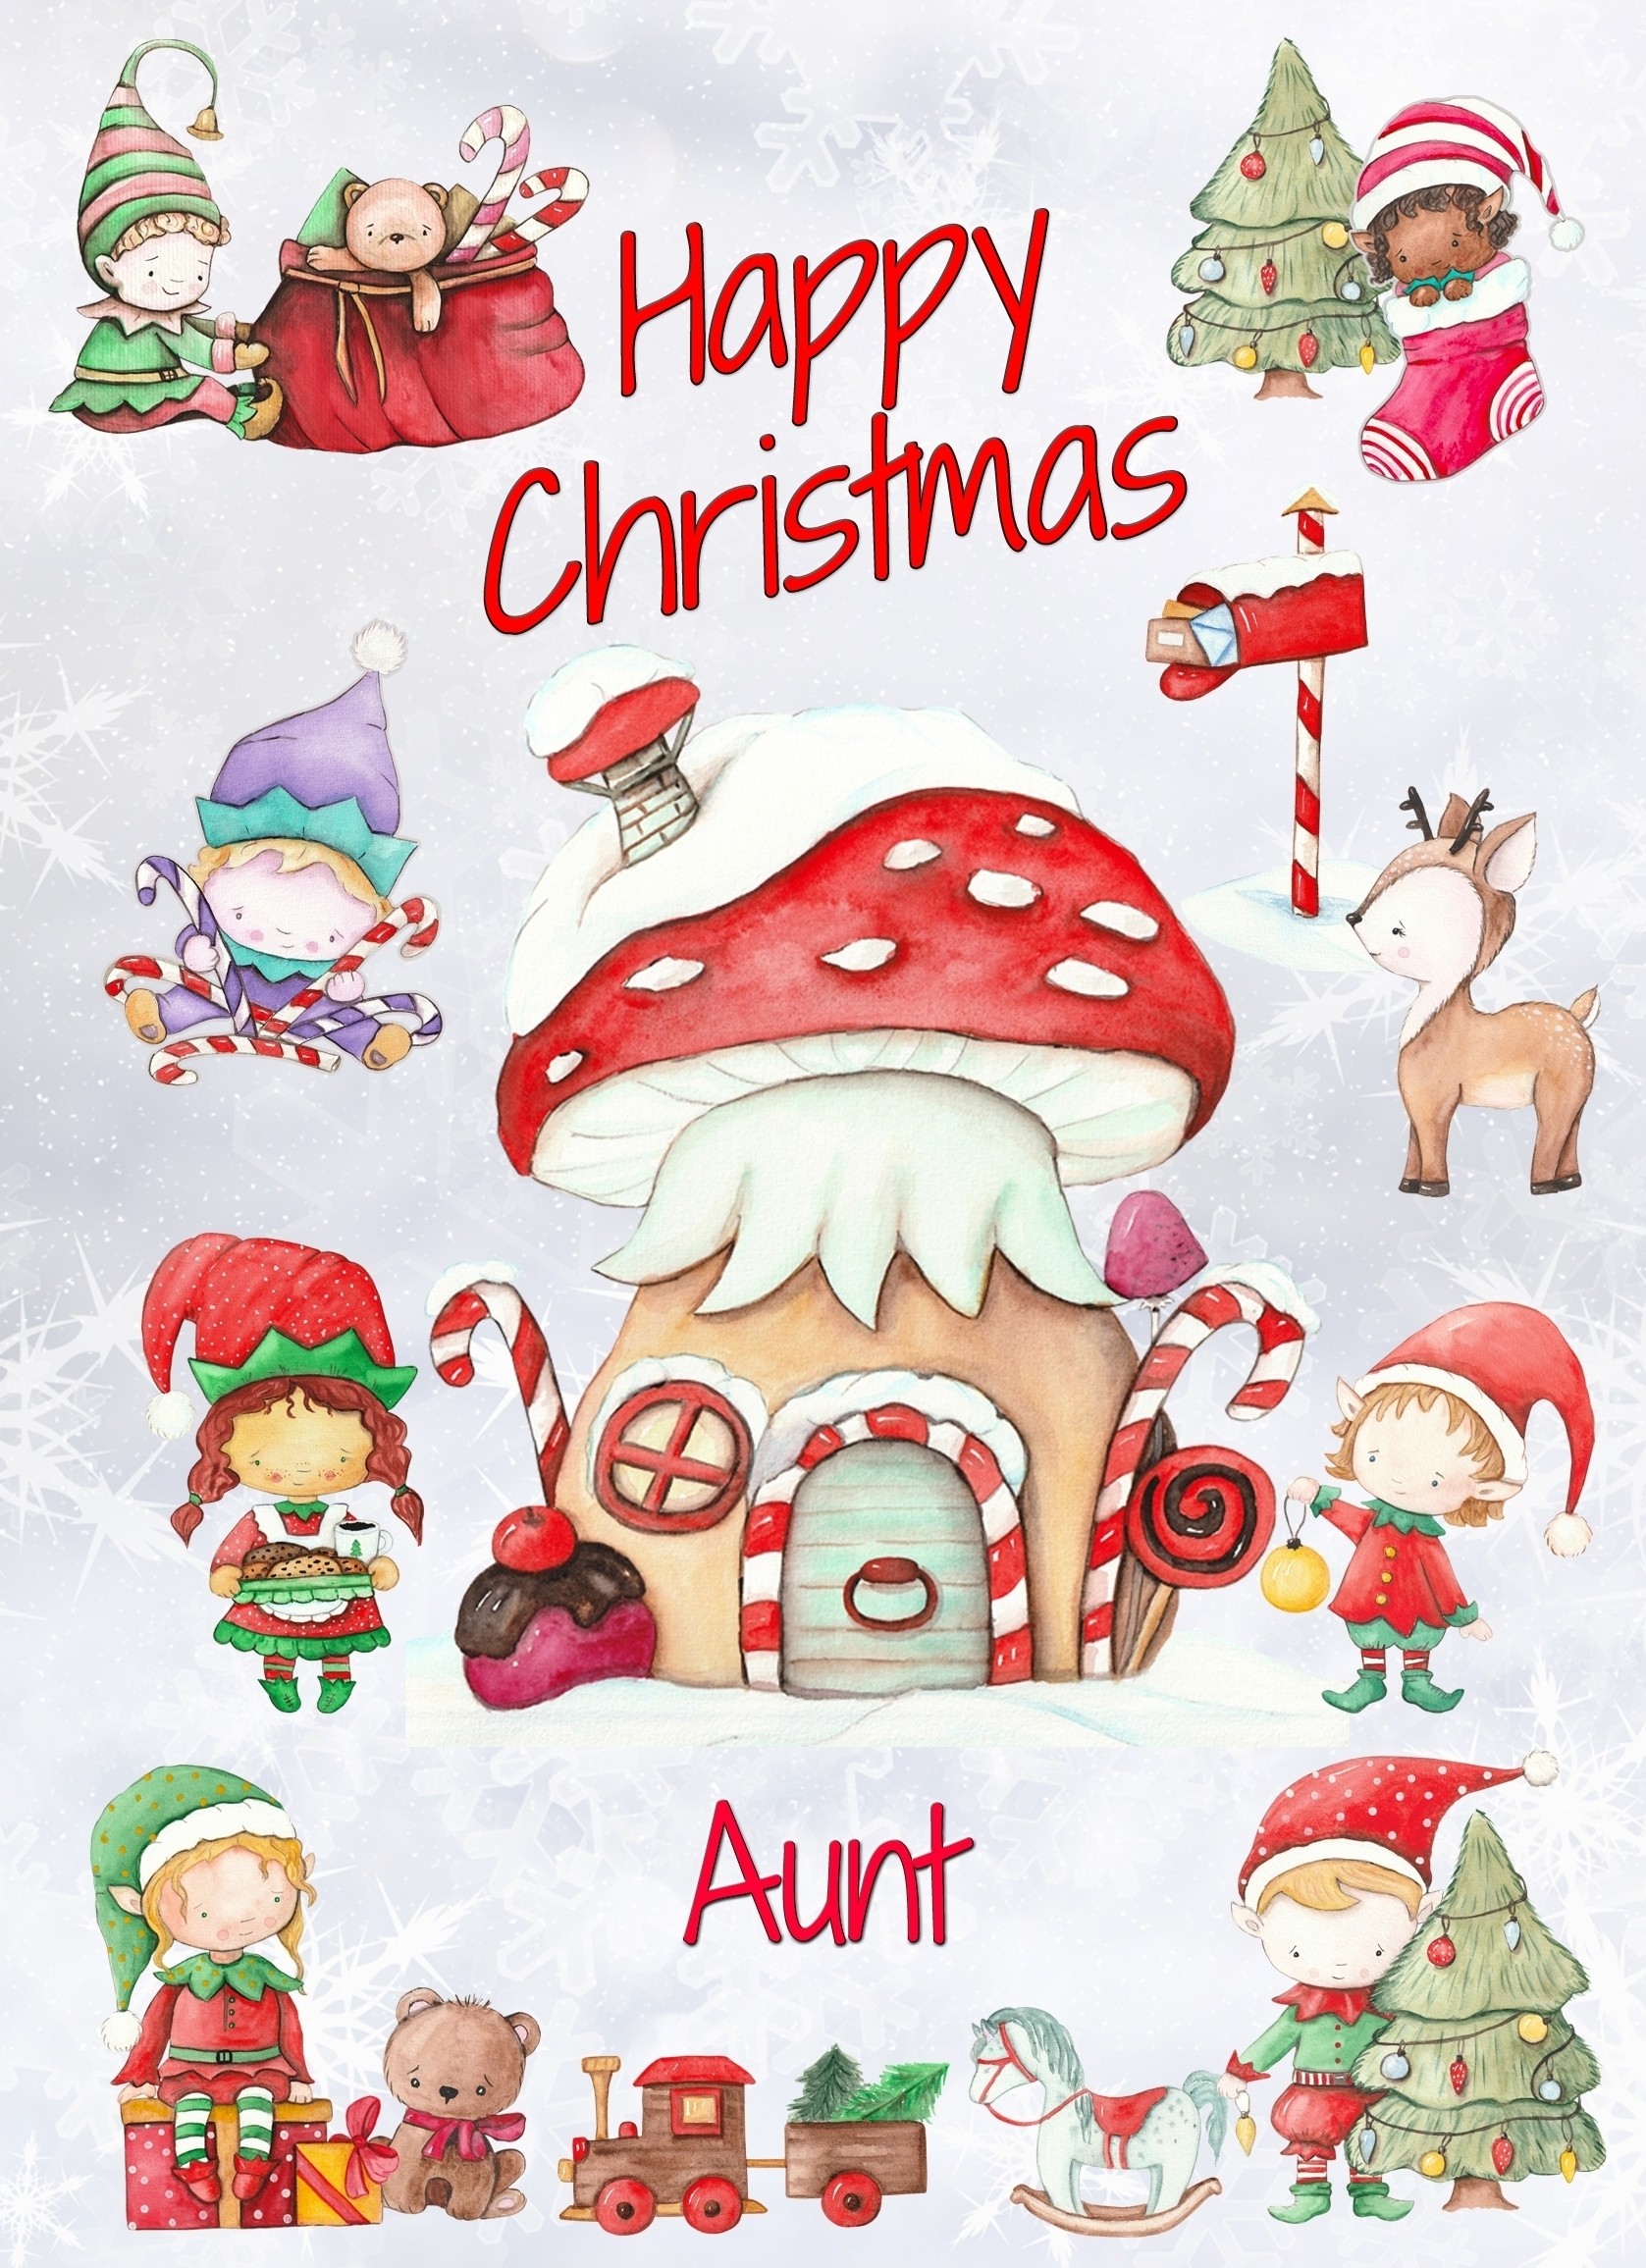 Christmas Card For Aunt (Elf, White)